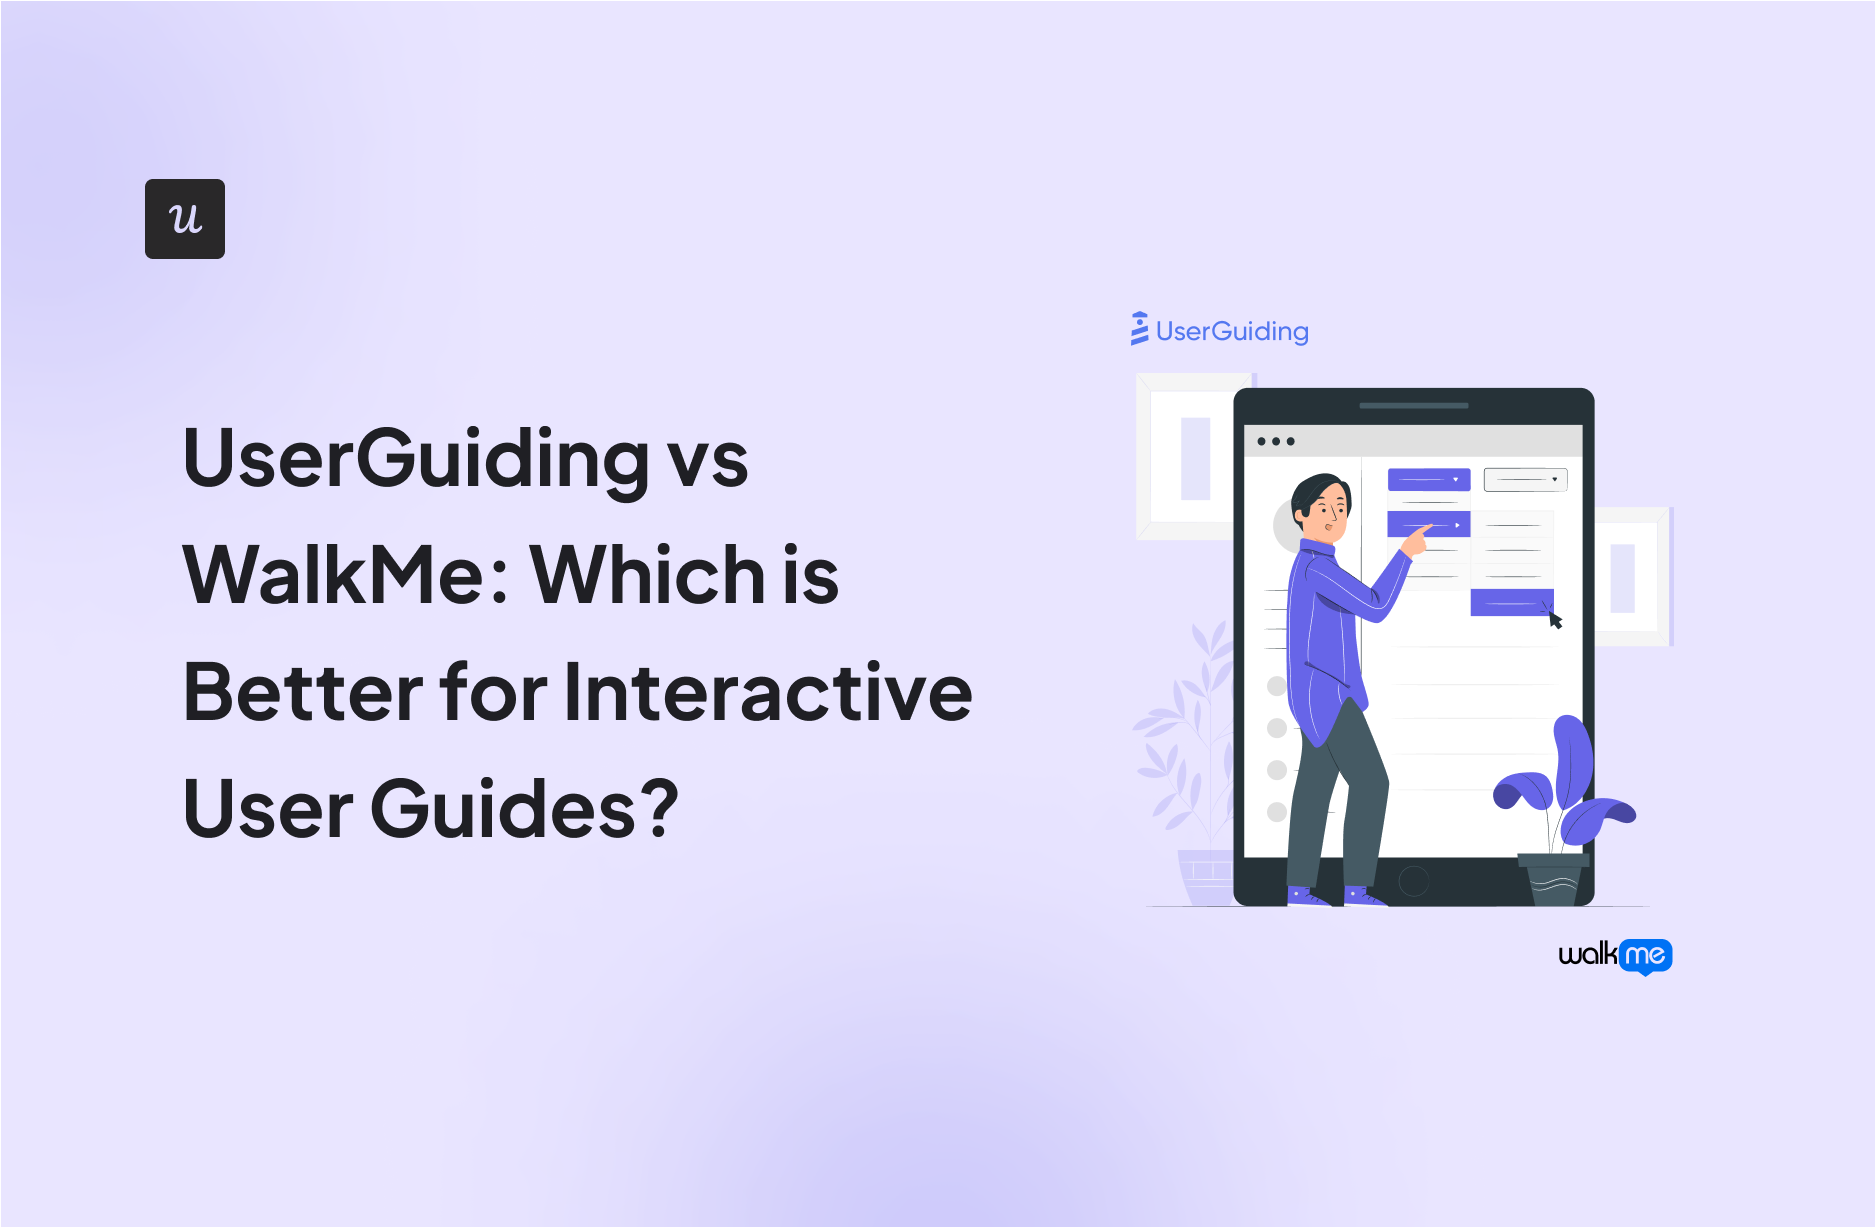 UserGuiding vs WalkMe: Which is Better for Interactive User Guides?